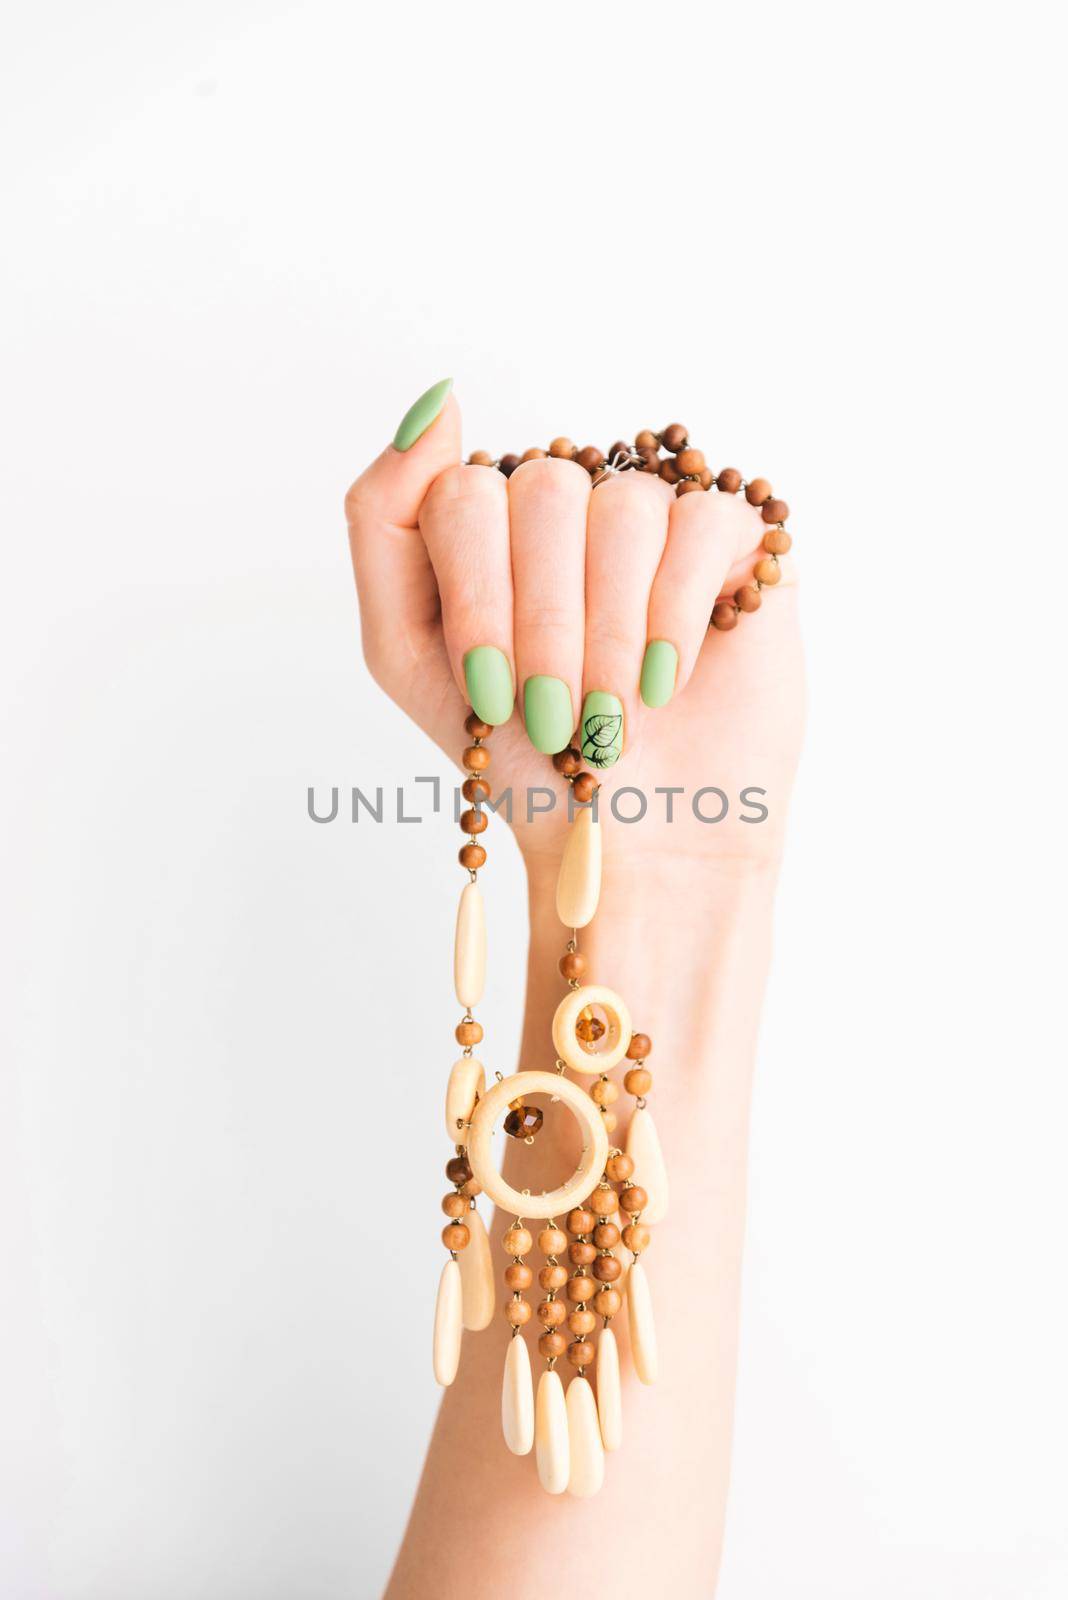 Female hand with green color manicure and art leaf design holding wooden handmade necklace on a white background.